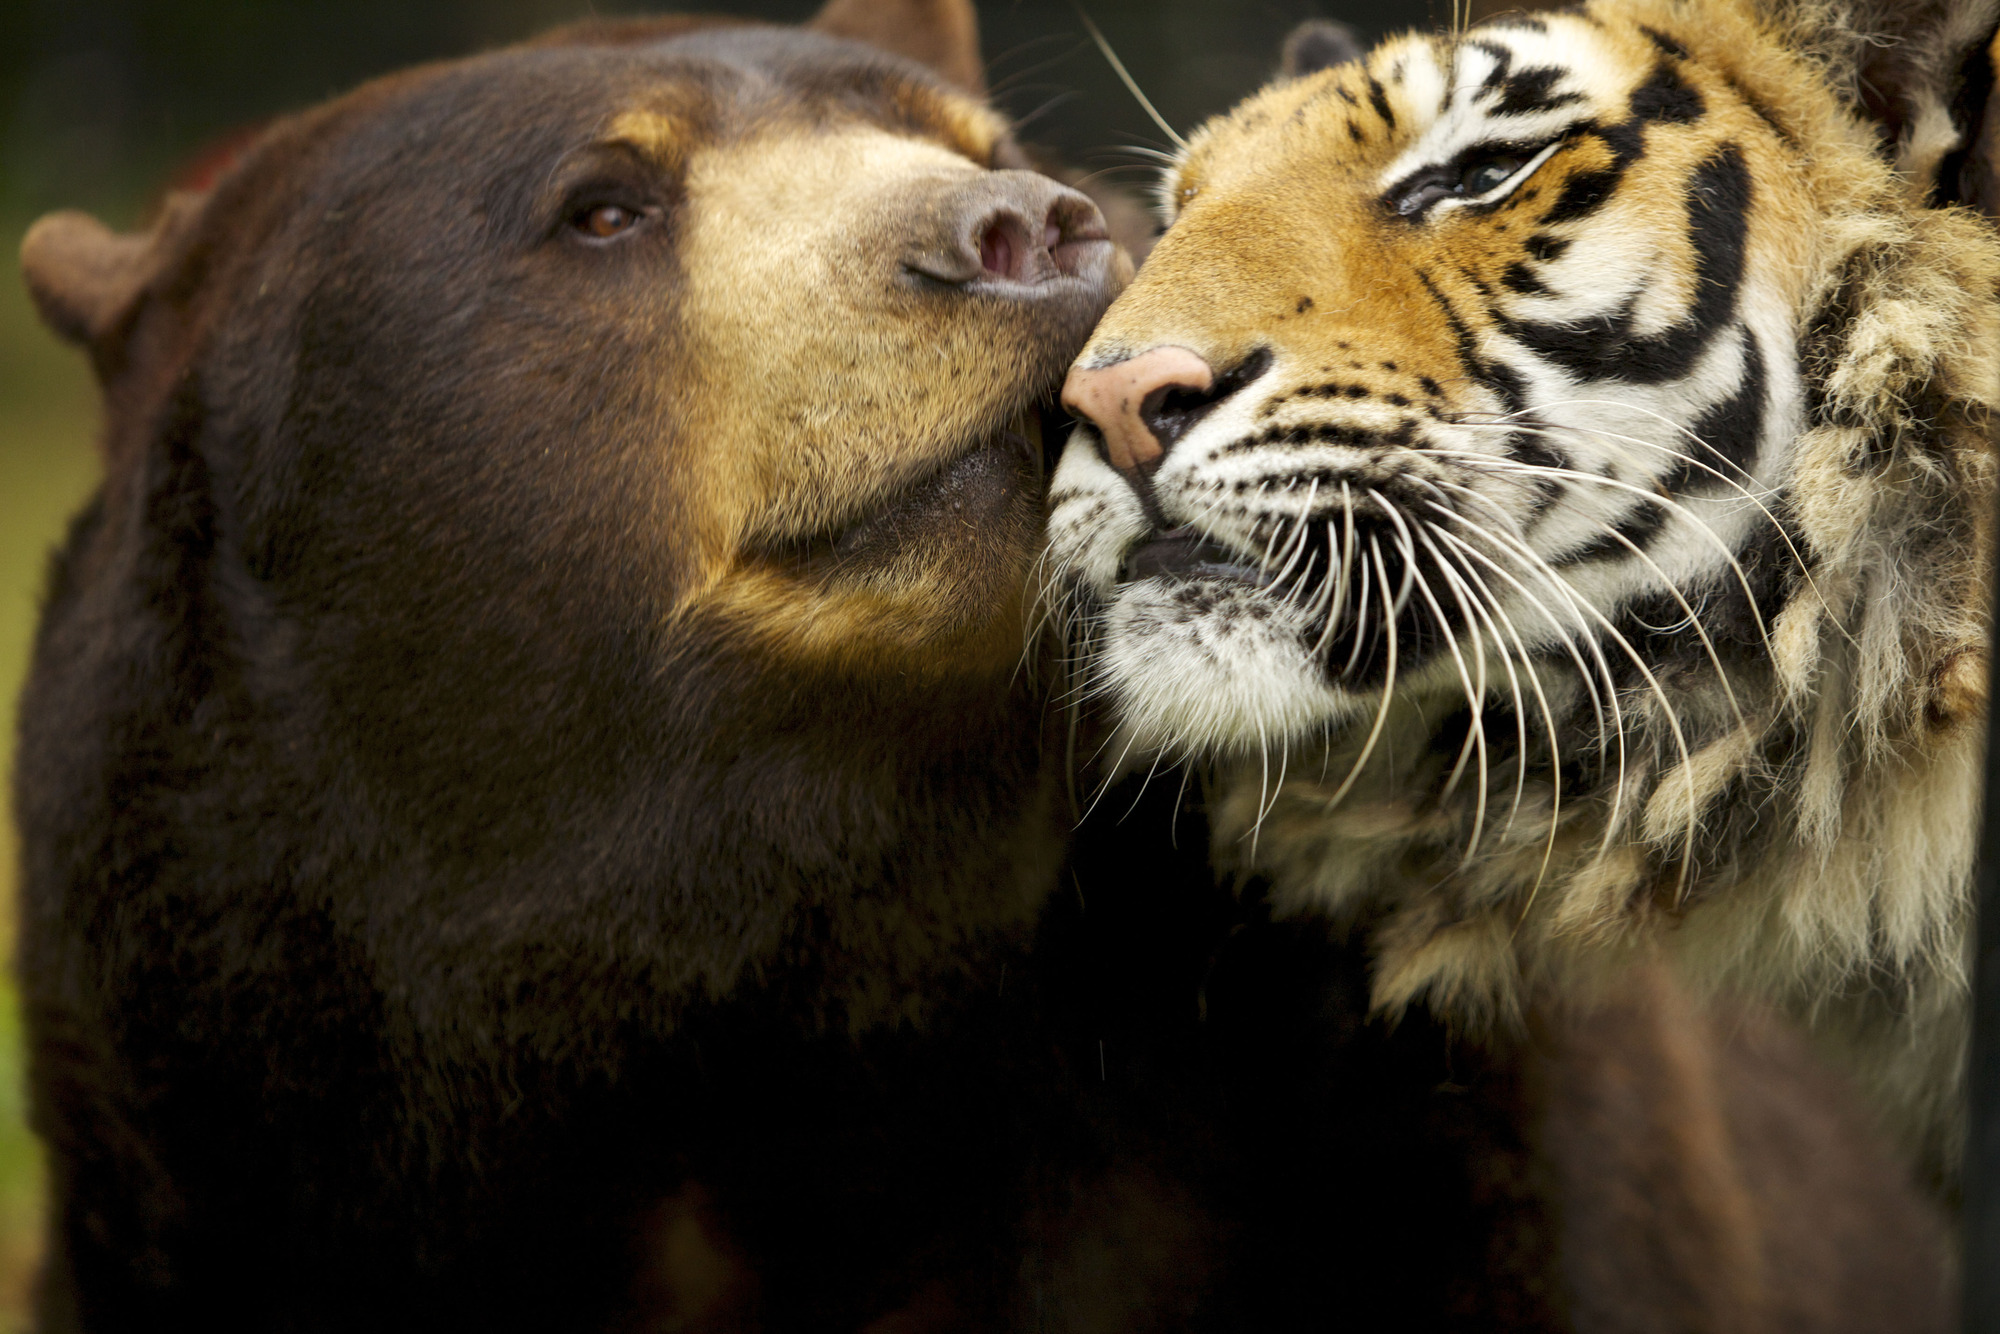 compassion-odd-aminal-couples-bear-and-cat.jpg